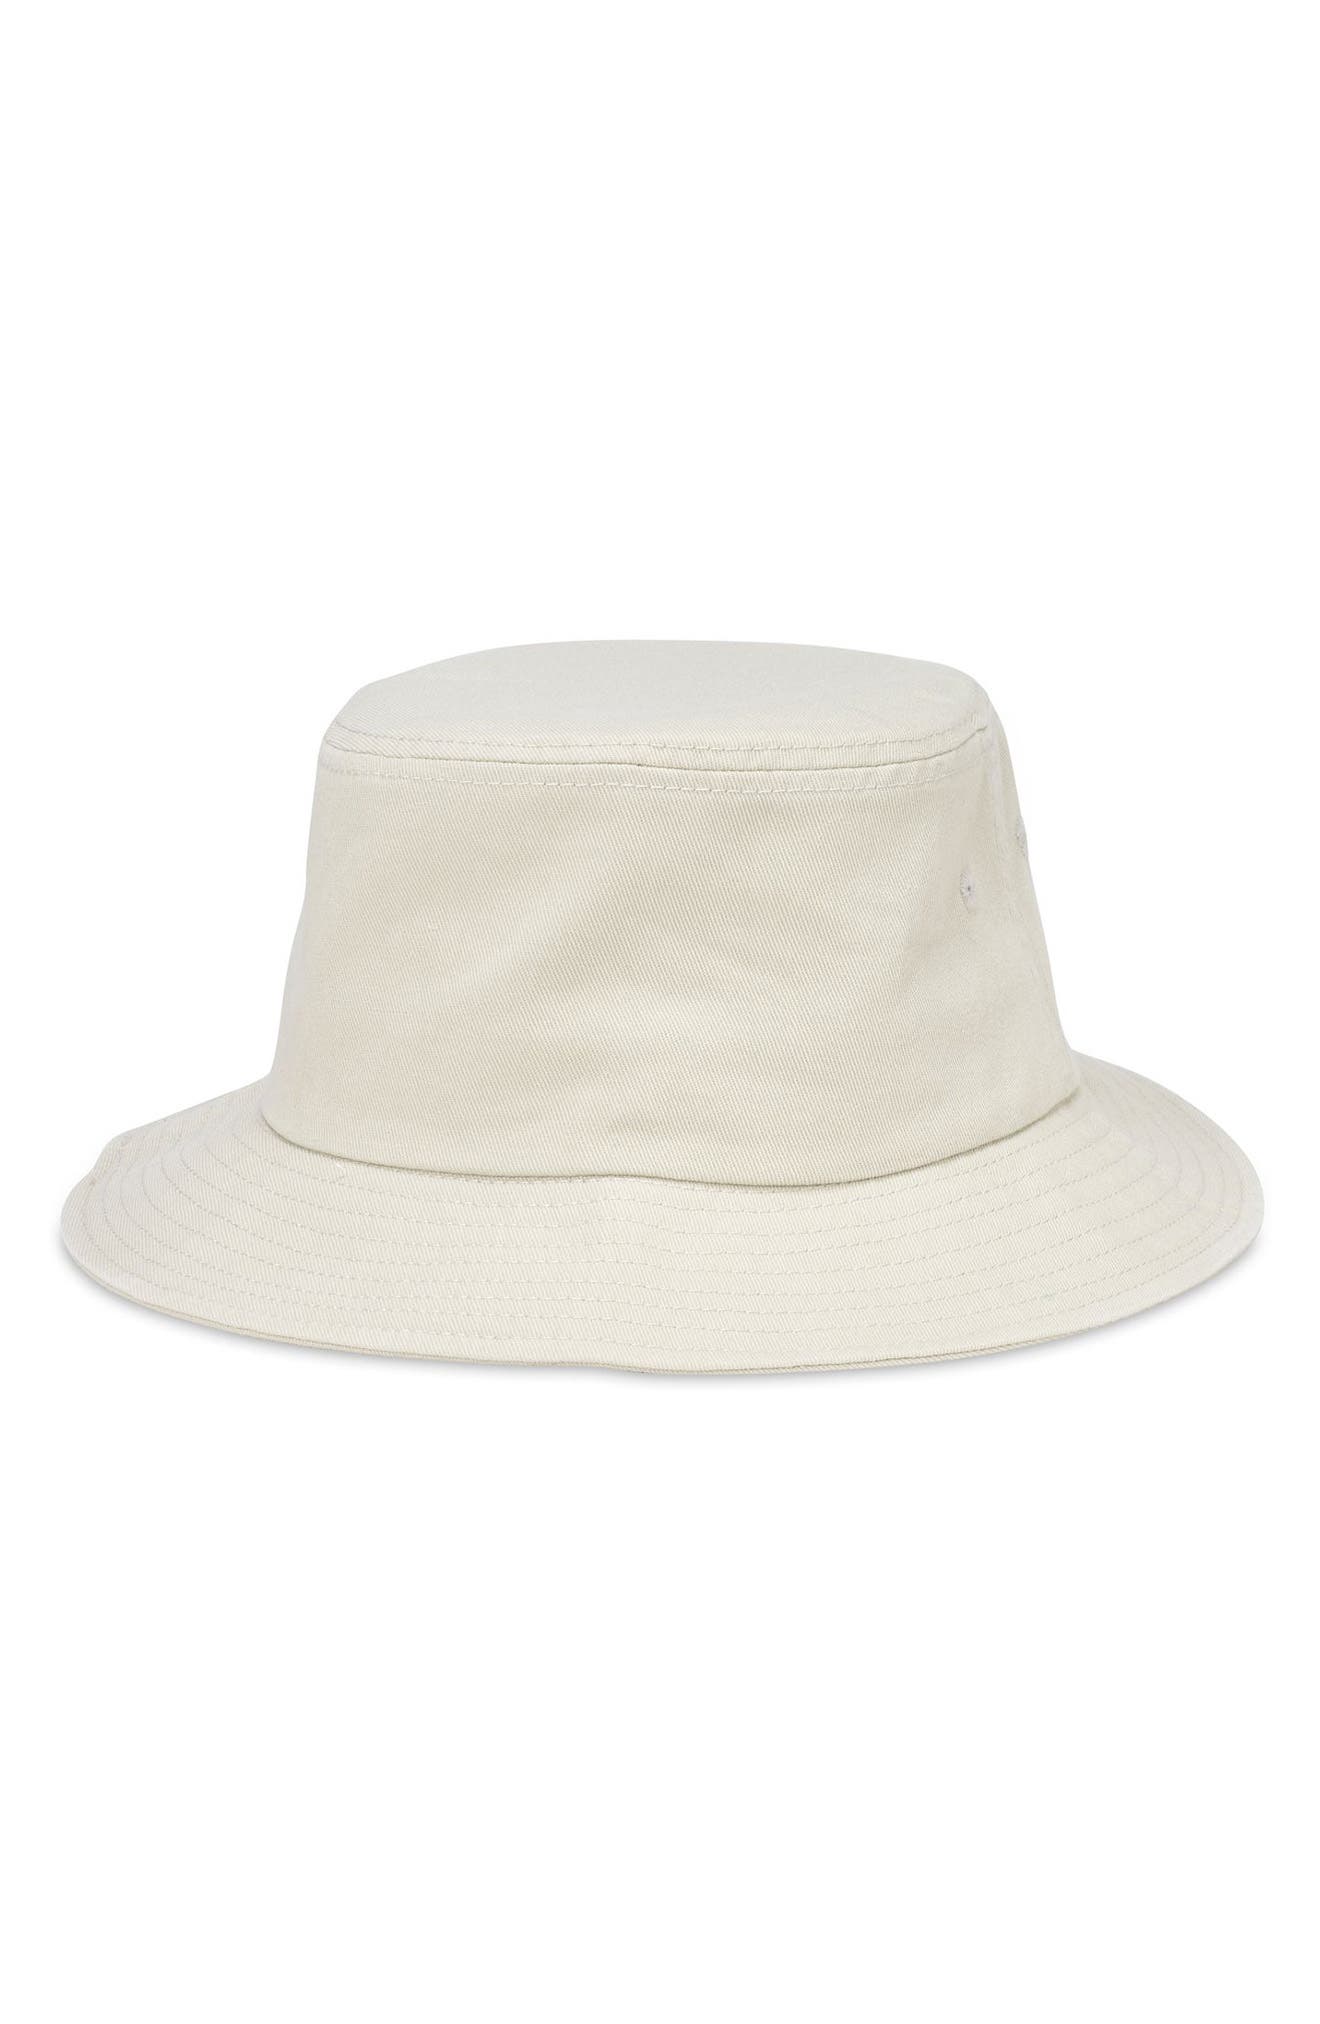 1960s – 70s Style Men’s Hats AMERICAN NEEDLE Washed Bucket Hat Size Largex-Large in Stone at Nordstrom Rack $12.97 AT vintagedancer.com